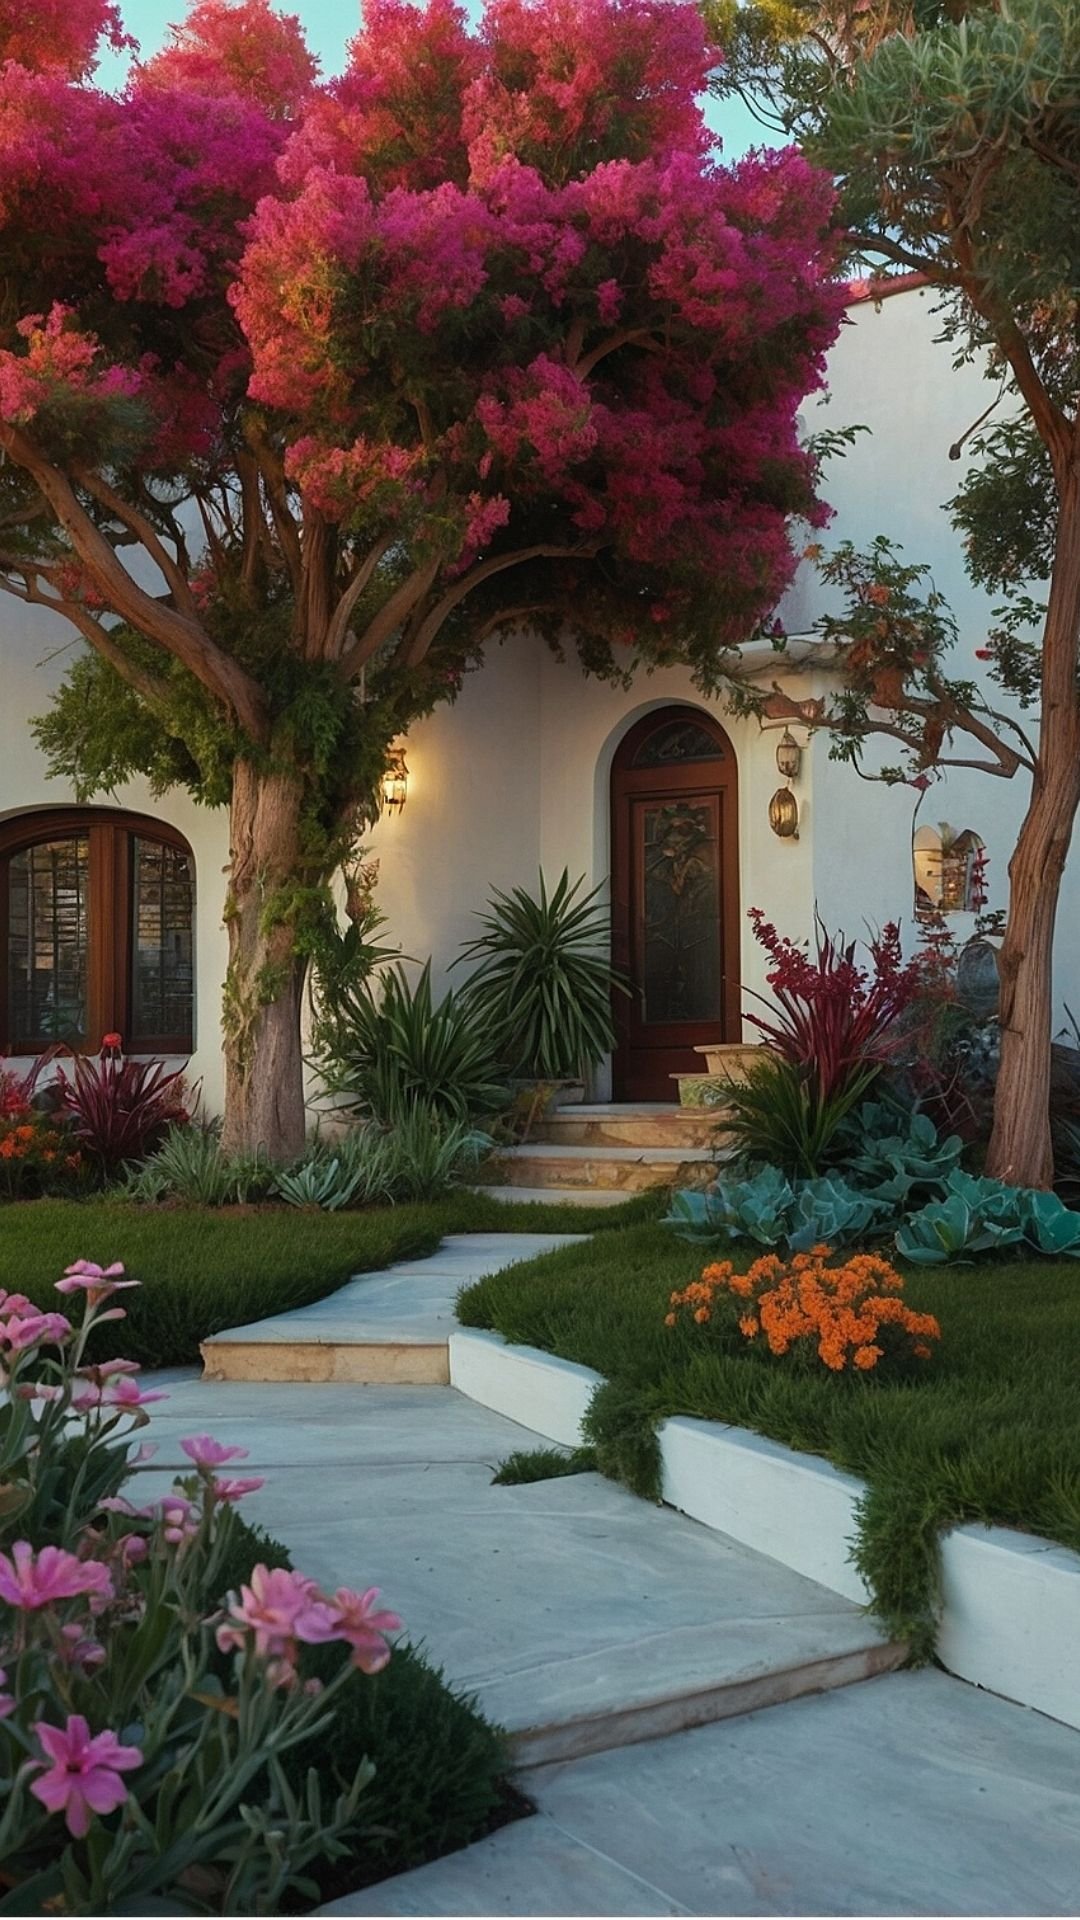 Twilight Serenity in a Blooming Front Yard – Magenta Bougainvillea Delight